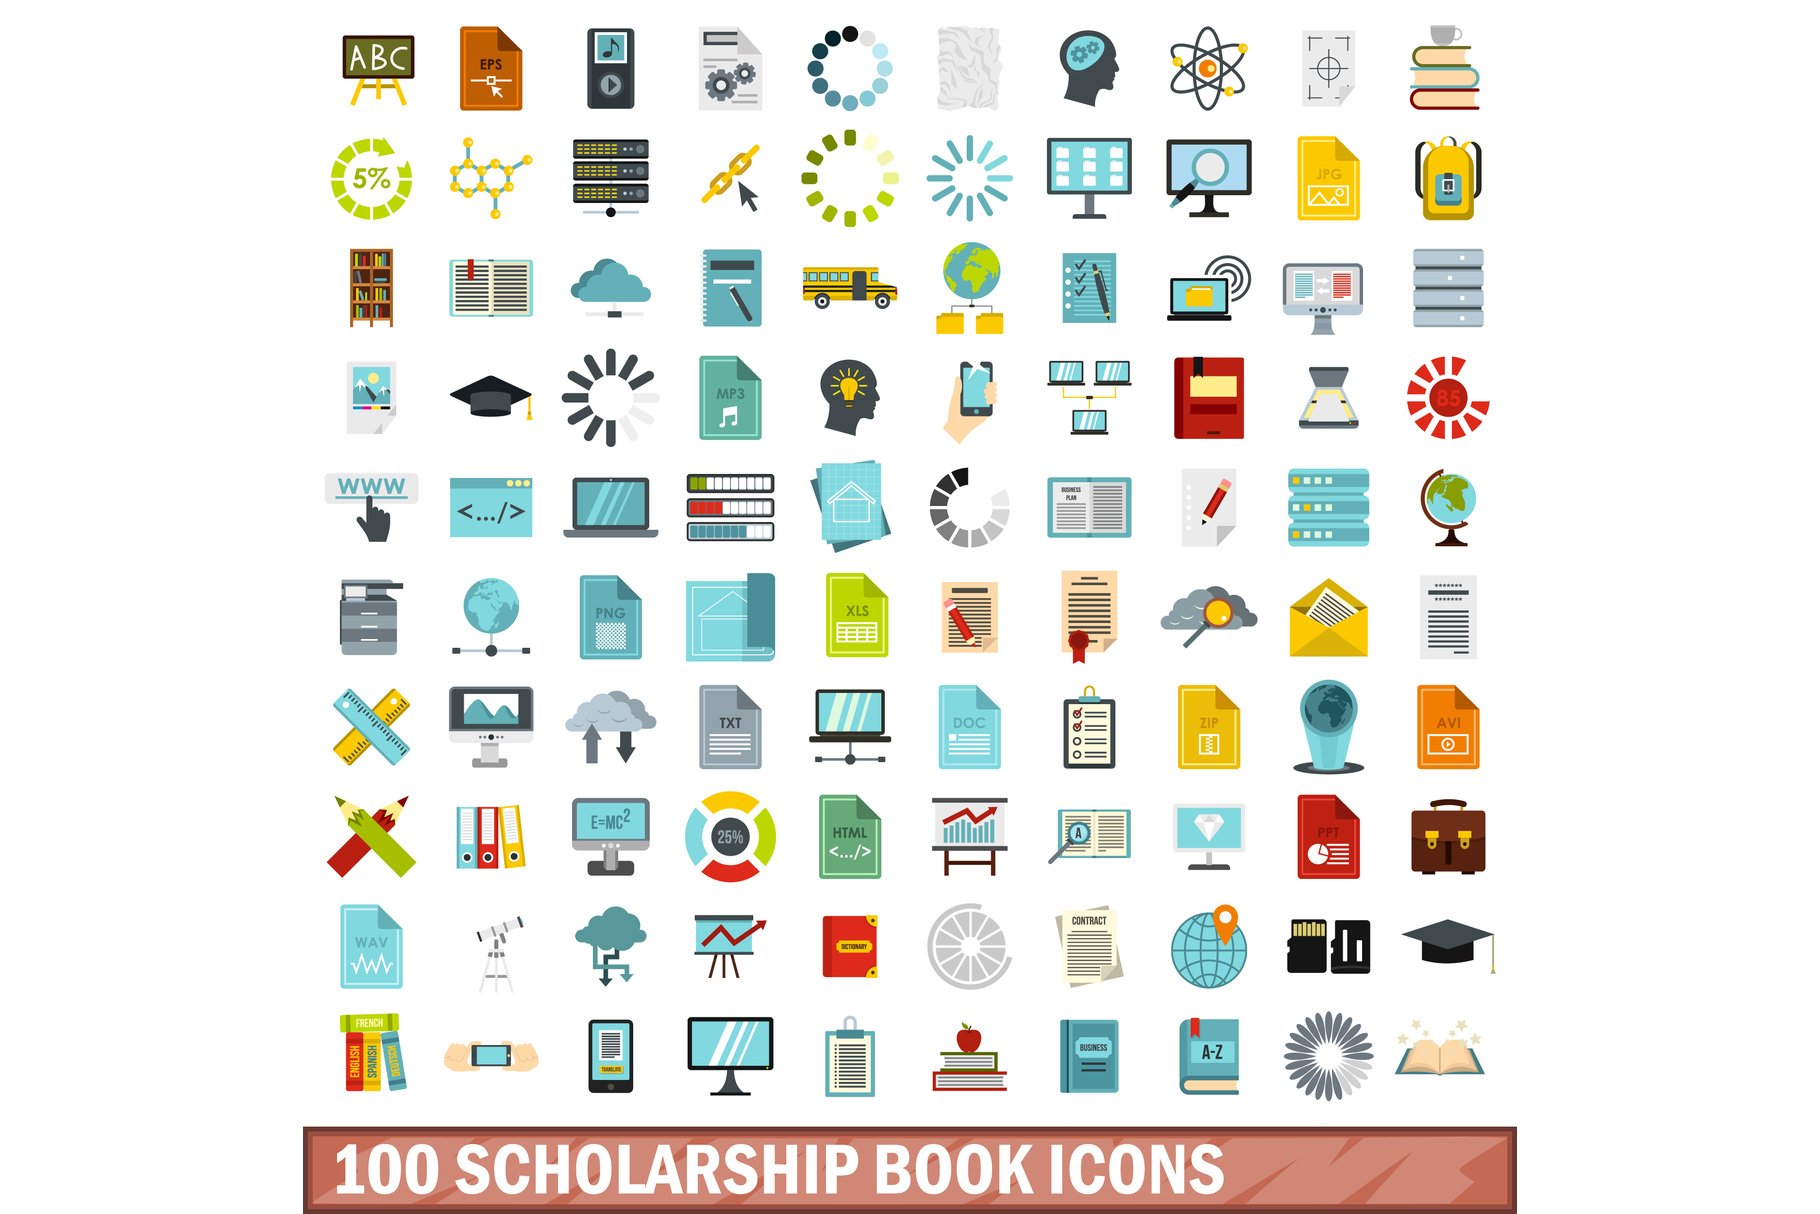 100 scholarship book icons set, flat cover image.